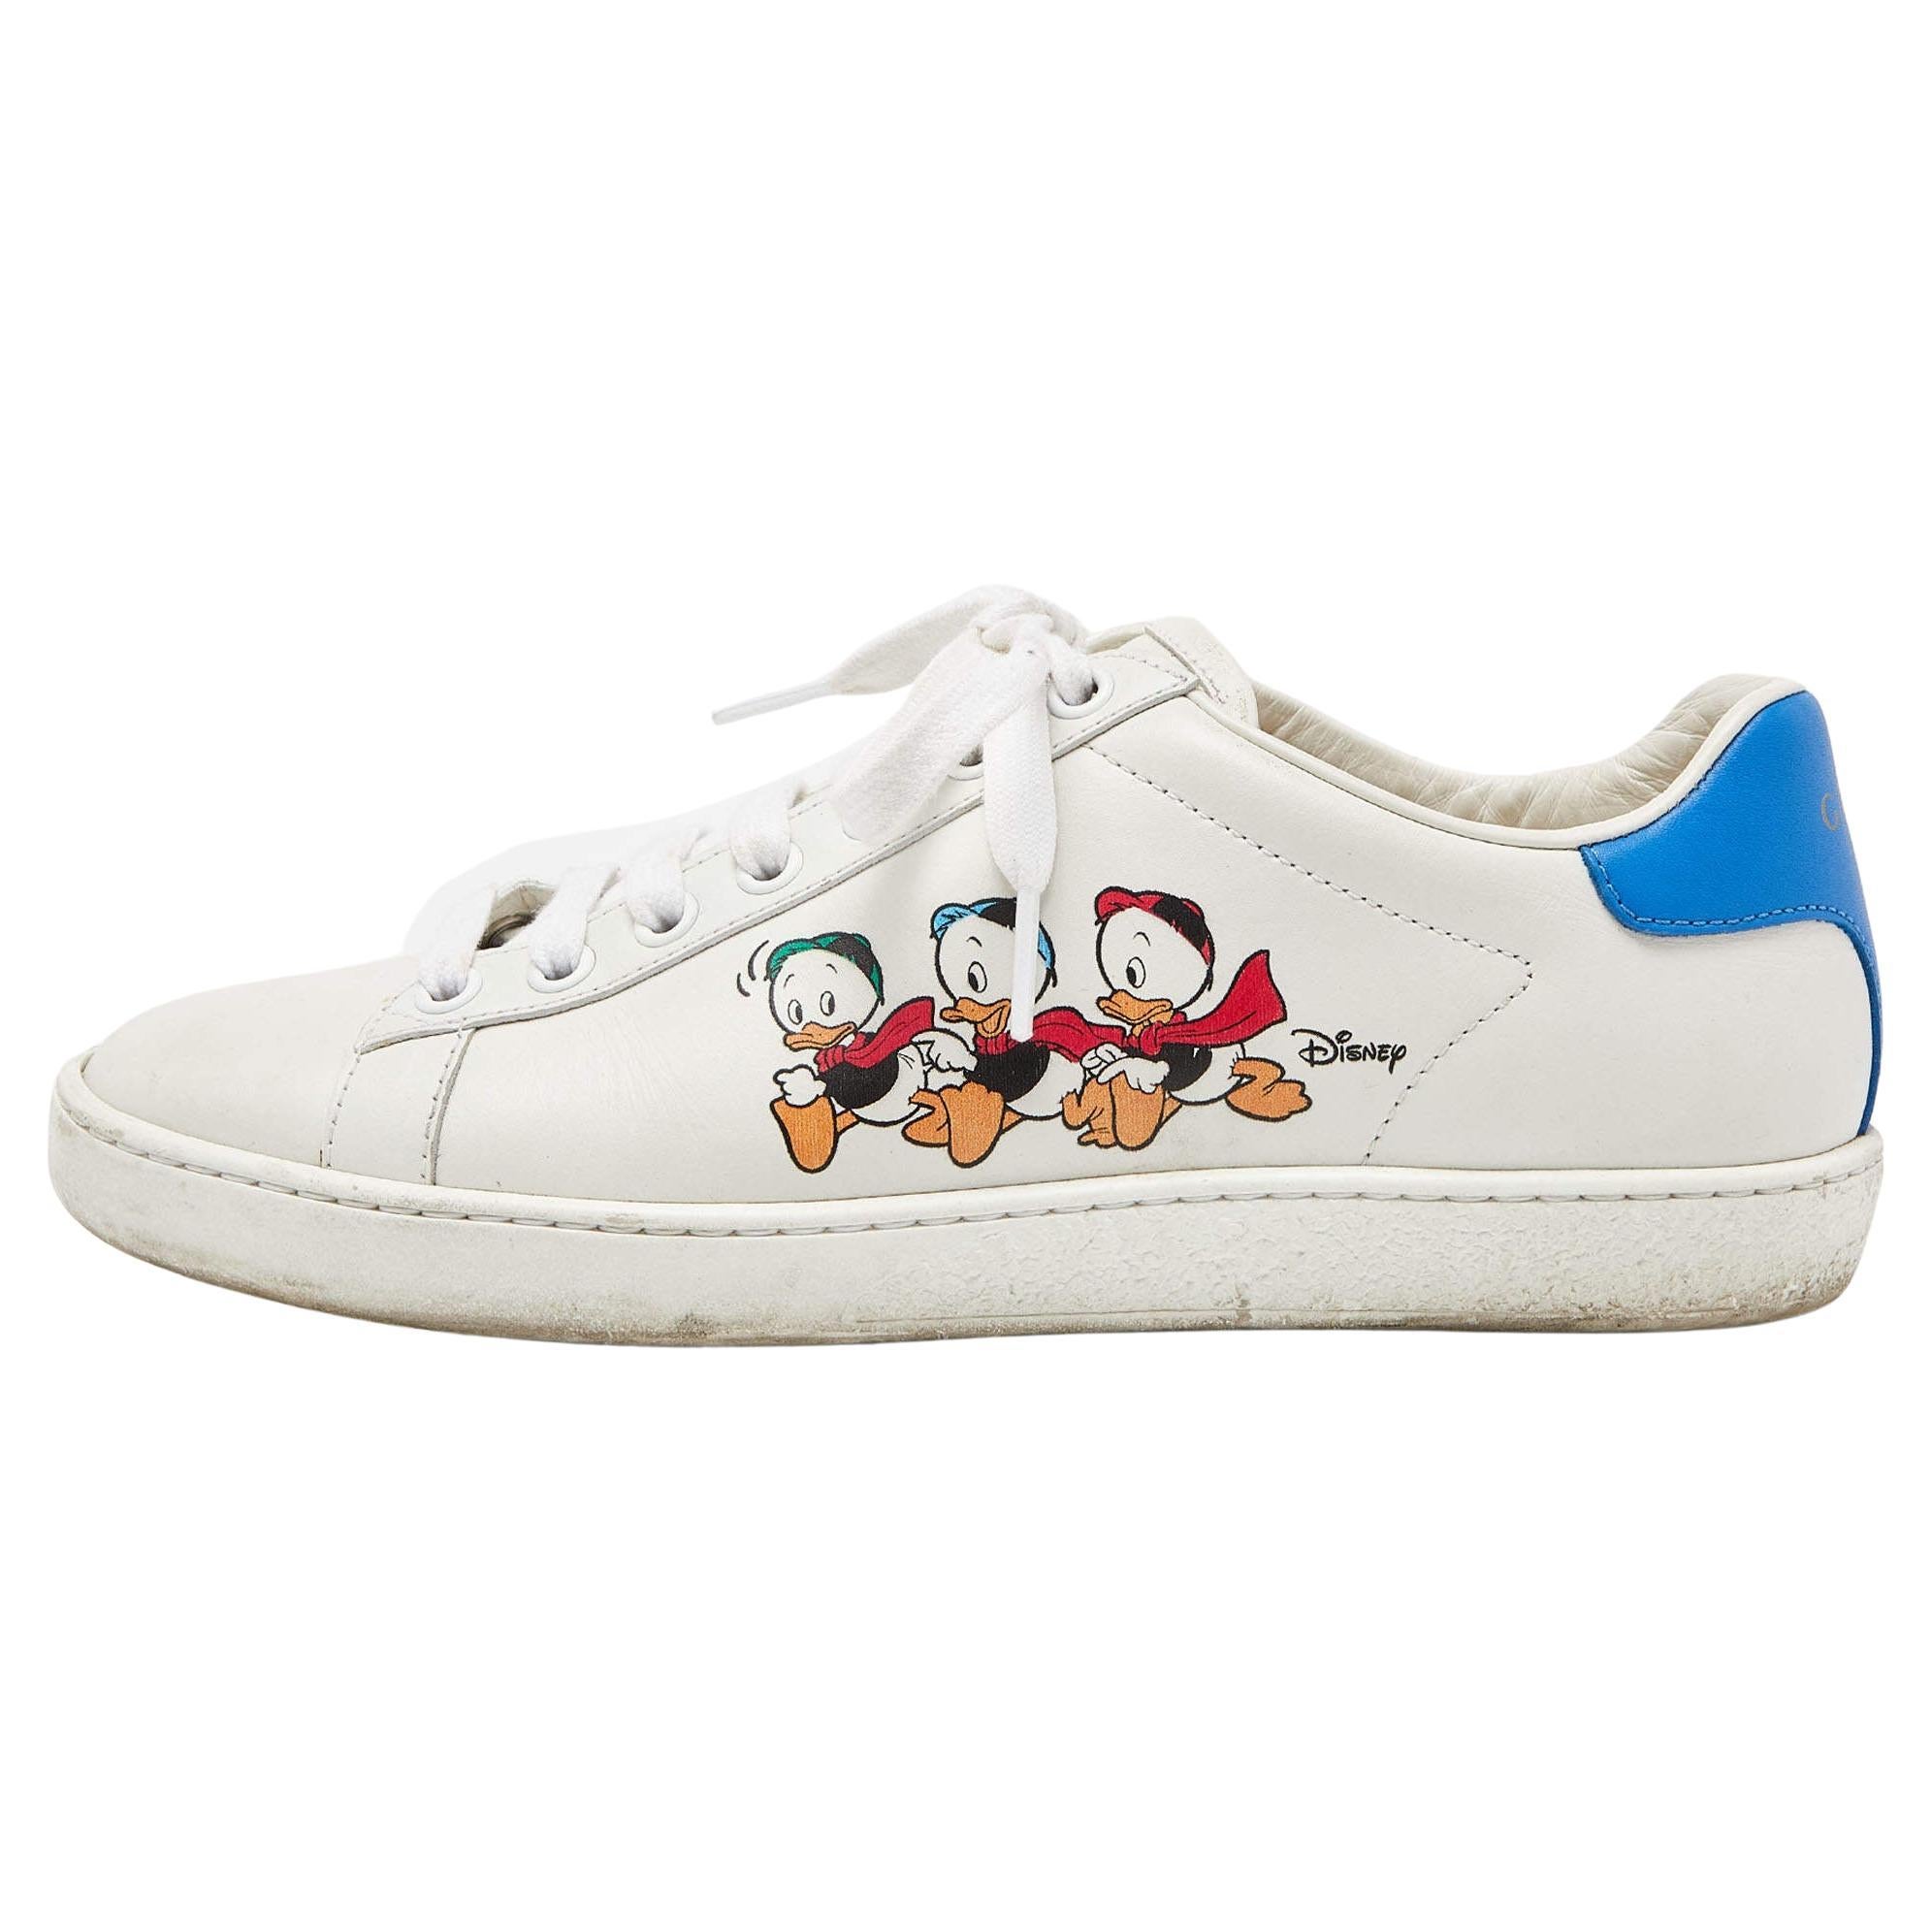 Gucci x Disney White/Blue Leather Huey, Dewey and Louie Ace Sneakers Size 36